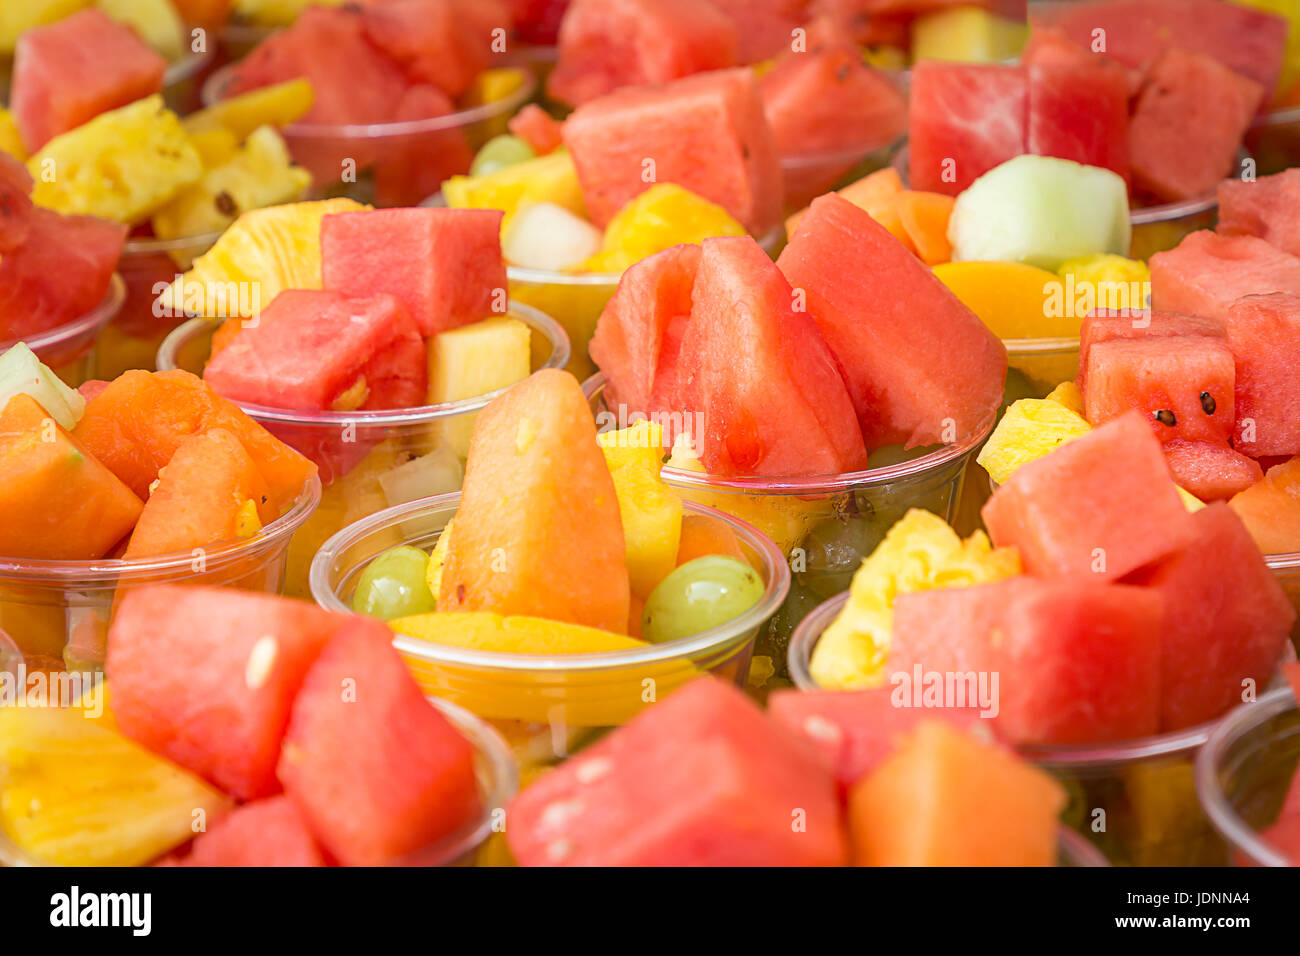 https://c8.alamy.com/comp/JDNNA4/a-variety-of-freshly-chopped-fruits-for-sale-in-cartons-at-the-cheshire-JDNNA4.jpg